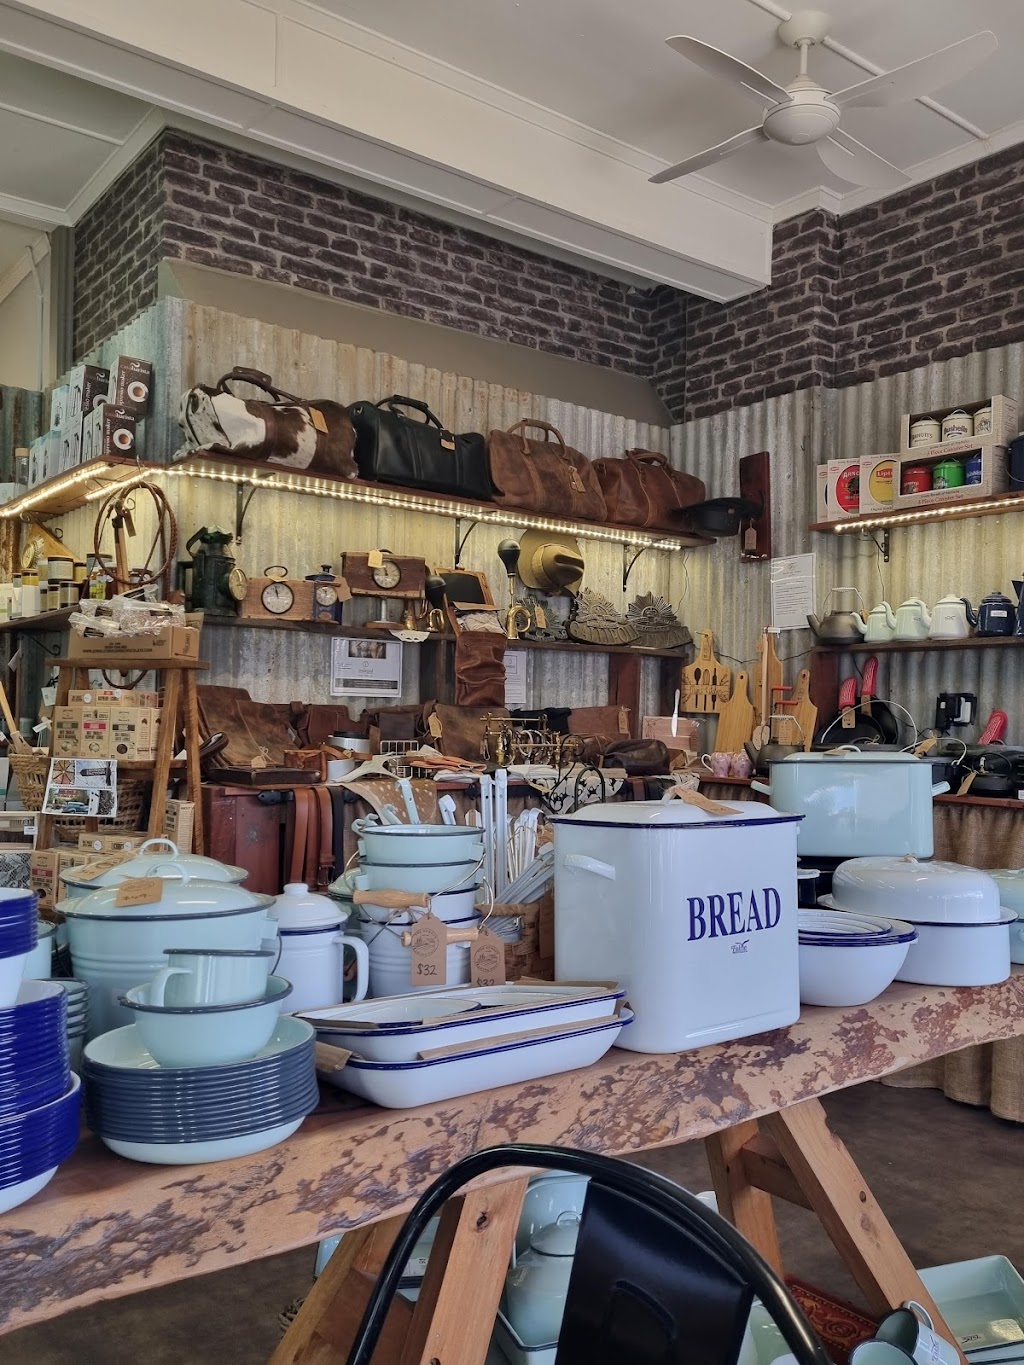 The Dungog Trading Post | 234 Dowling St, Dungog NSW 2420, Australia | Phone: 02 49922250